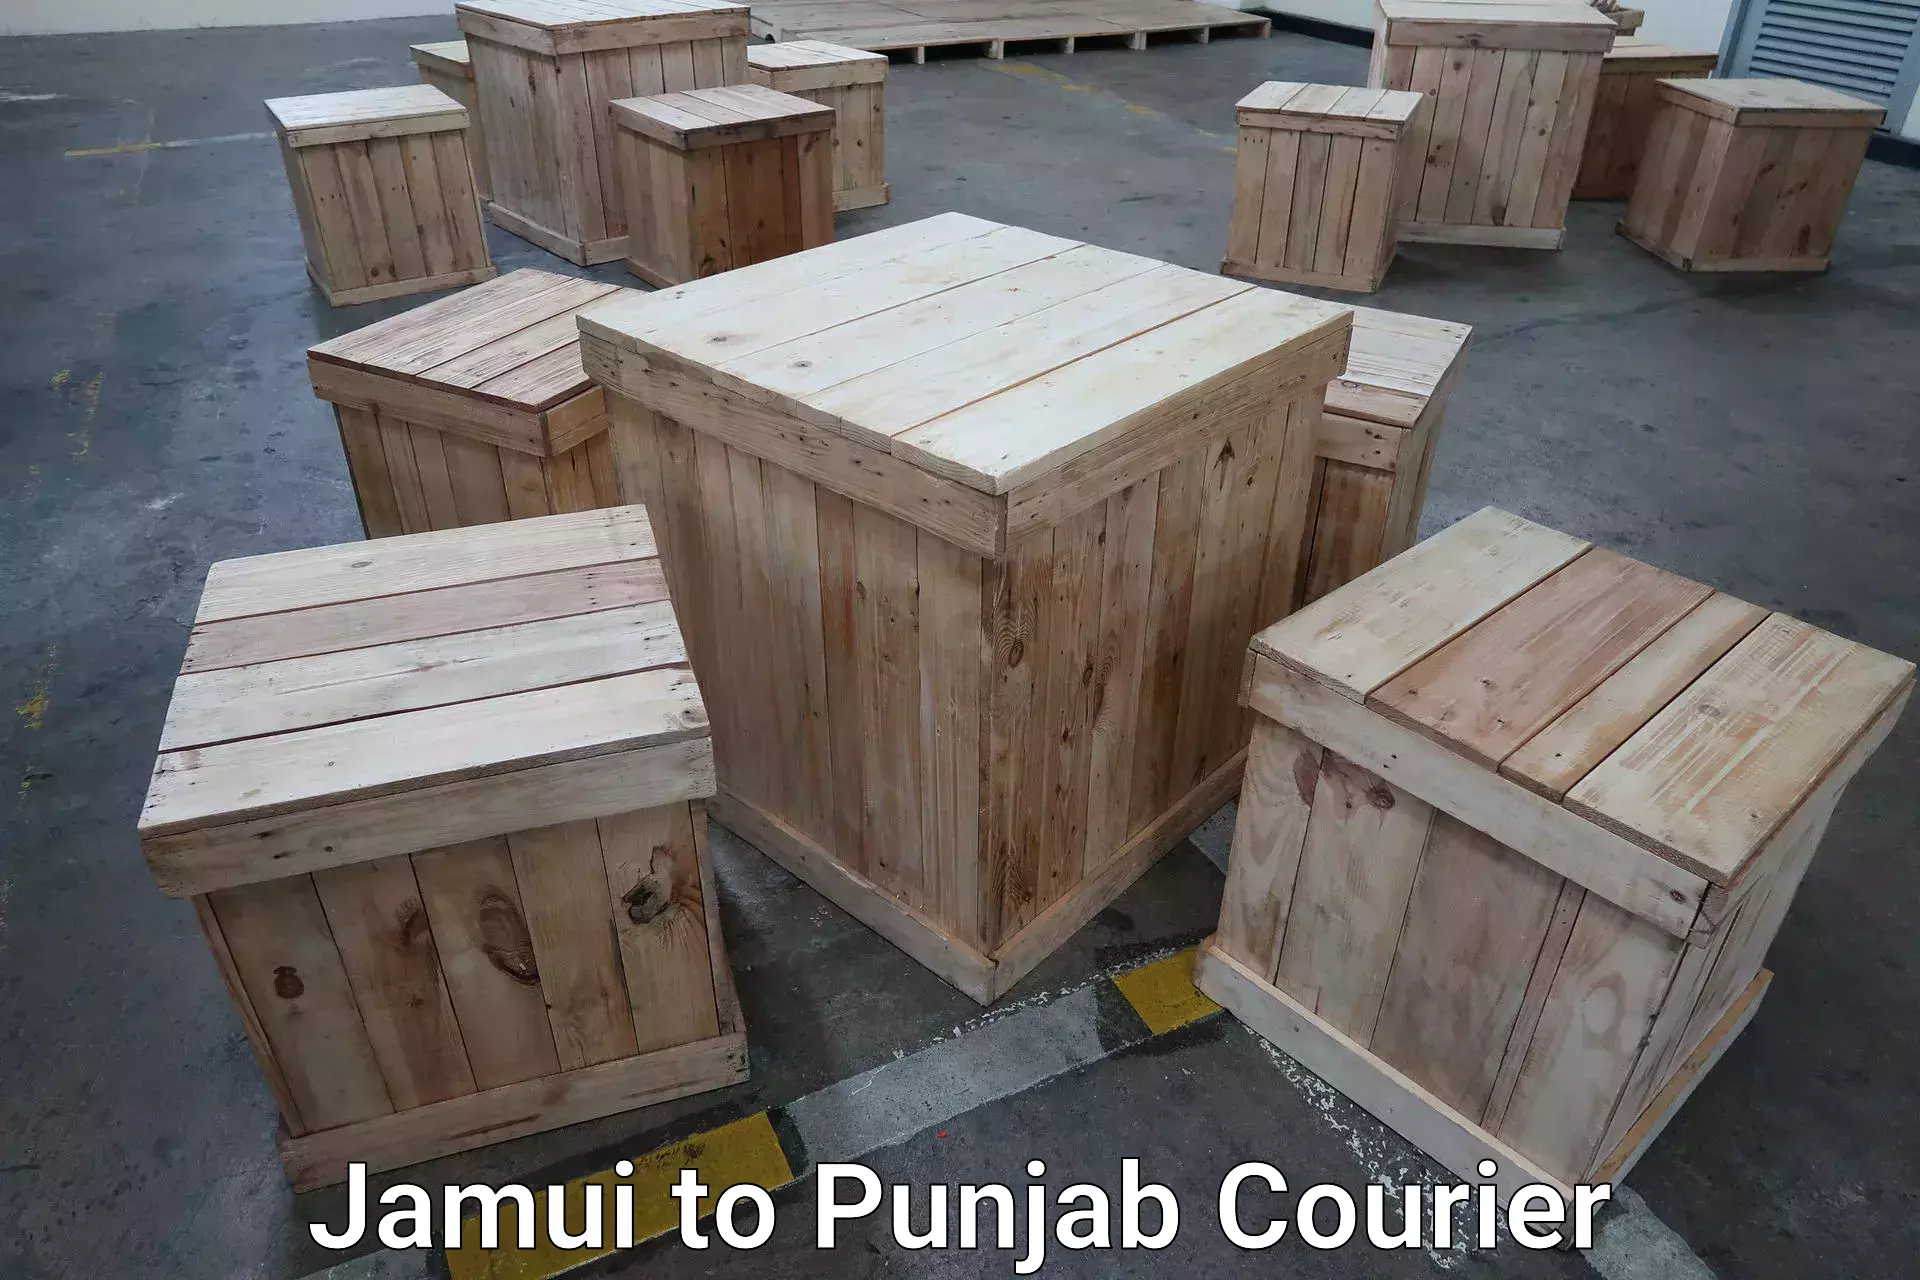 Luggage delivery network Jamui to Mohali